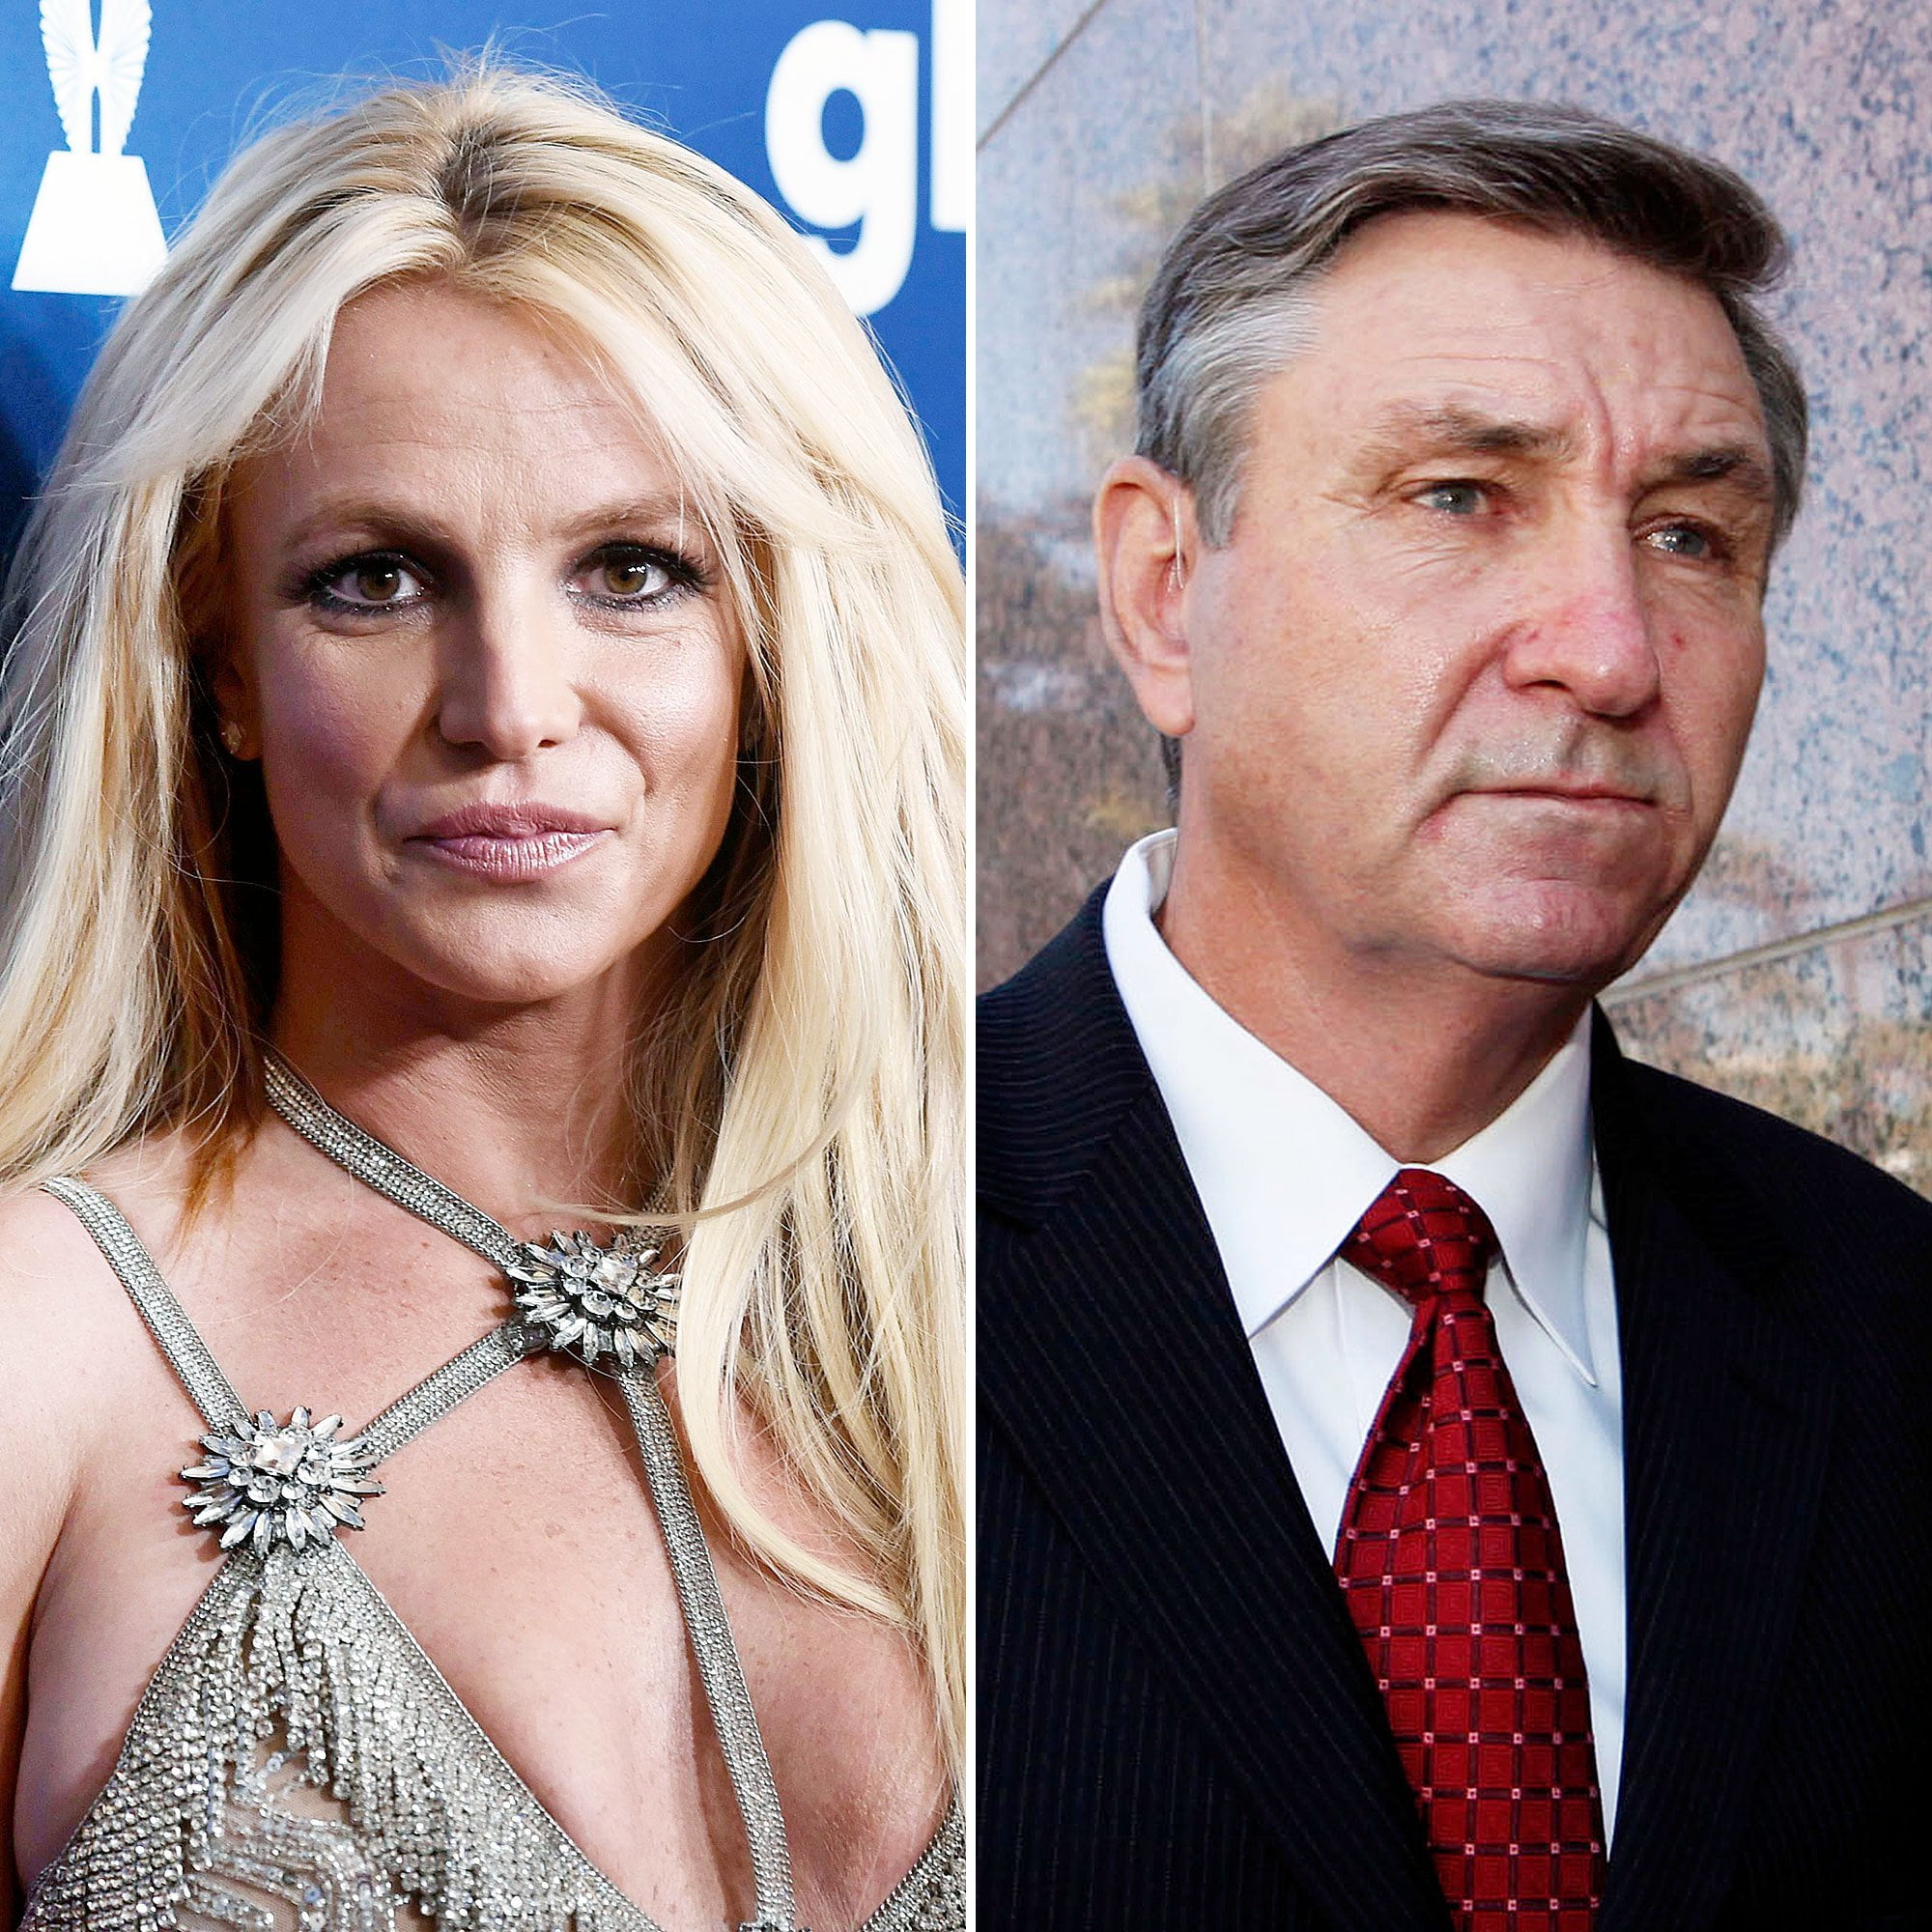 Britney Spears’ Father Breaks His Silence Amid Conservatorship Battle – Claims They Haven’t Talked Since She Filed For Him To Be Removed And He Misses Her!